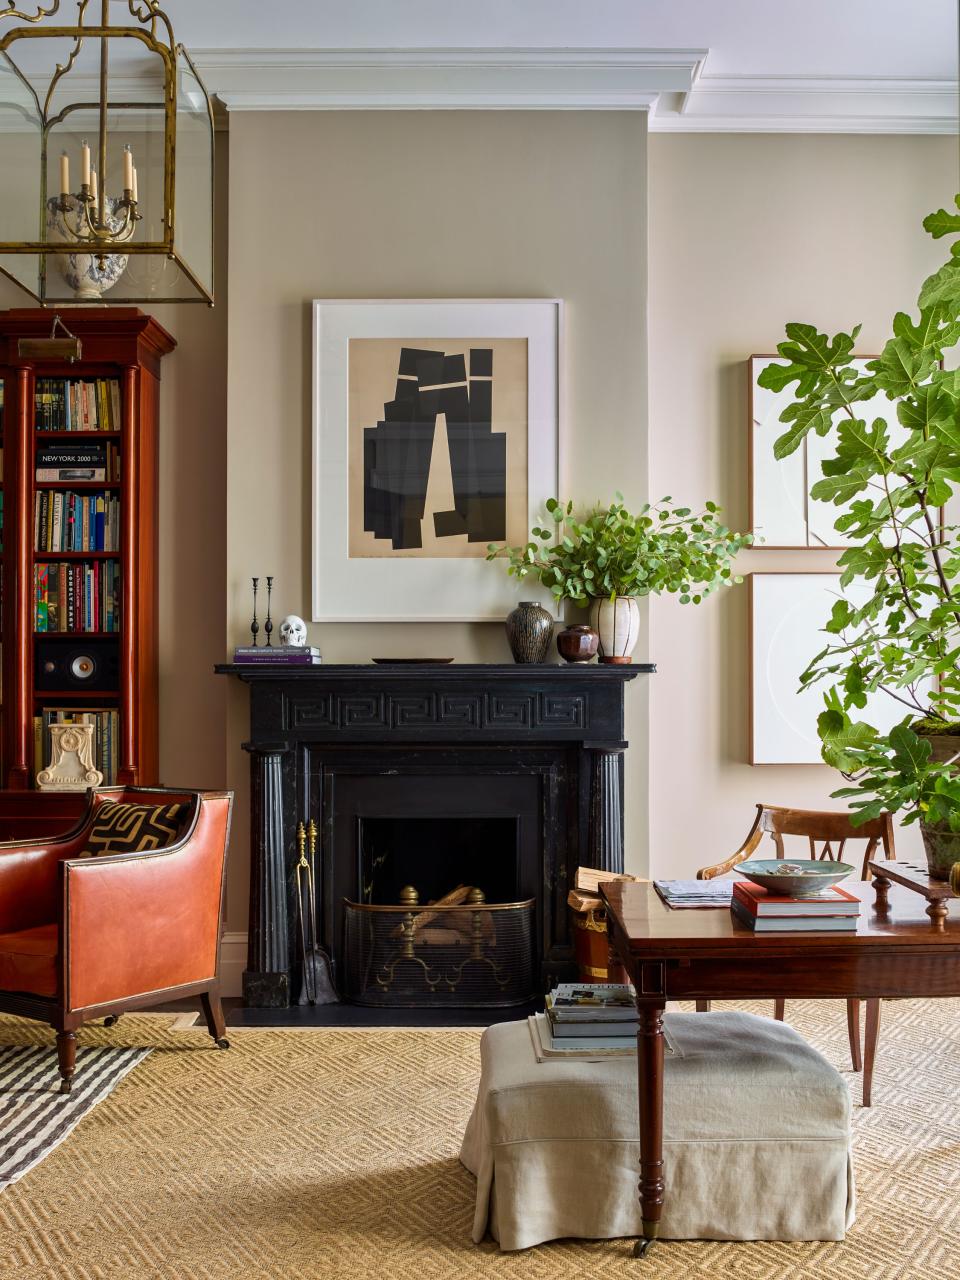 A custom scagliola mantel designed by Schafer and fabricated by plaster artisan Ahmad Suleiman dominates a light-filled corner of the living room. The artwork is by Jack Sonenberg. An antique dining table purchased in Bath, England, serves as a desk for post-office late-night work; it’s paired with a 19th-century leather and wood library chair.